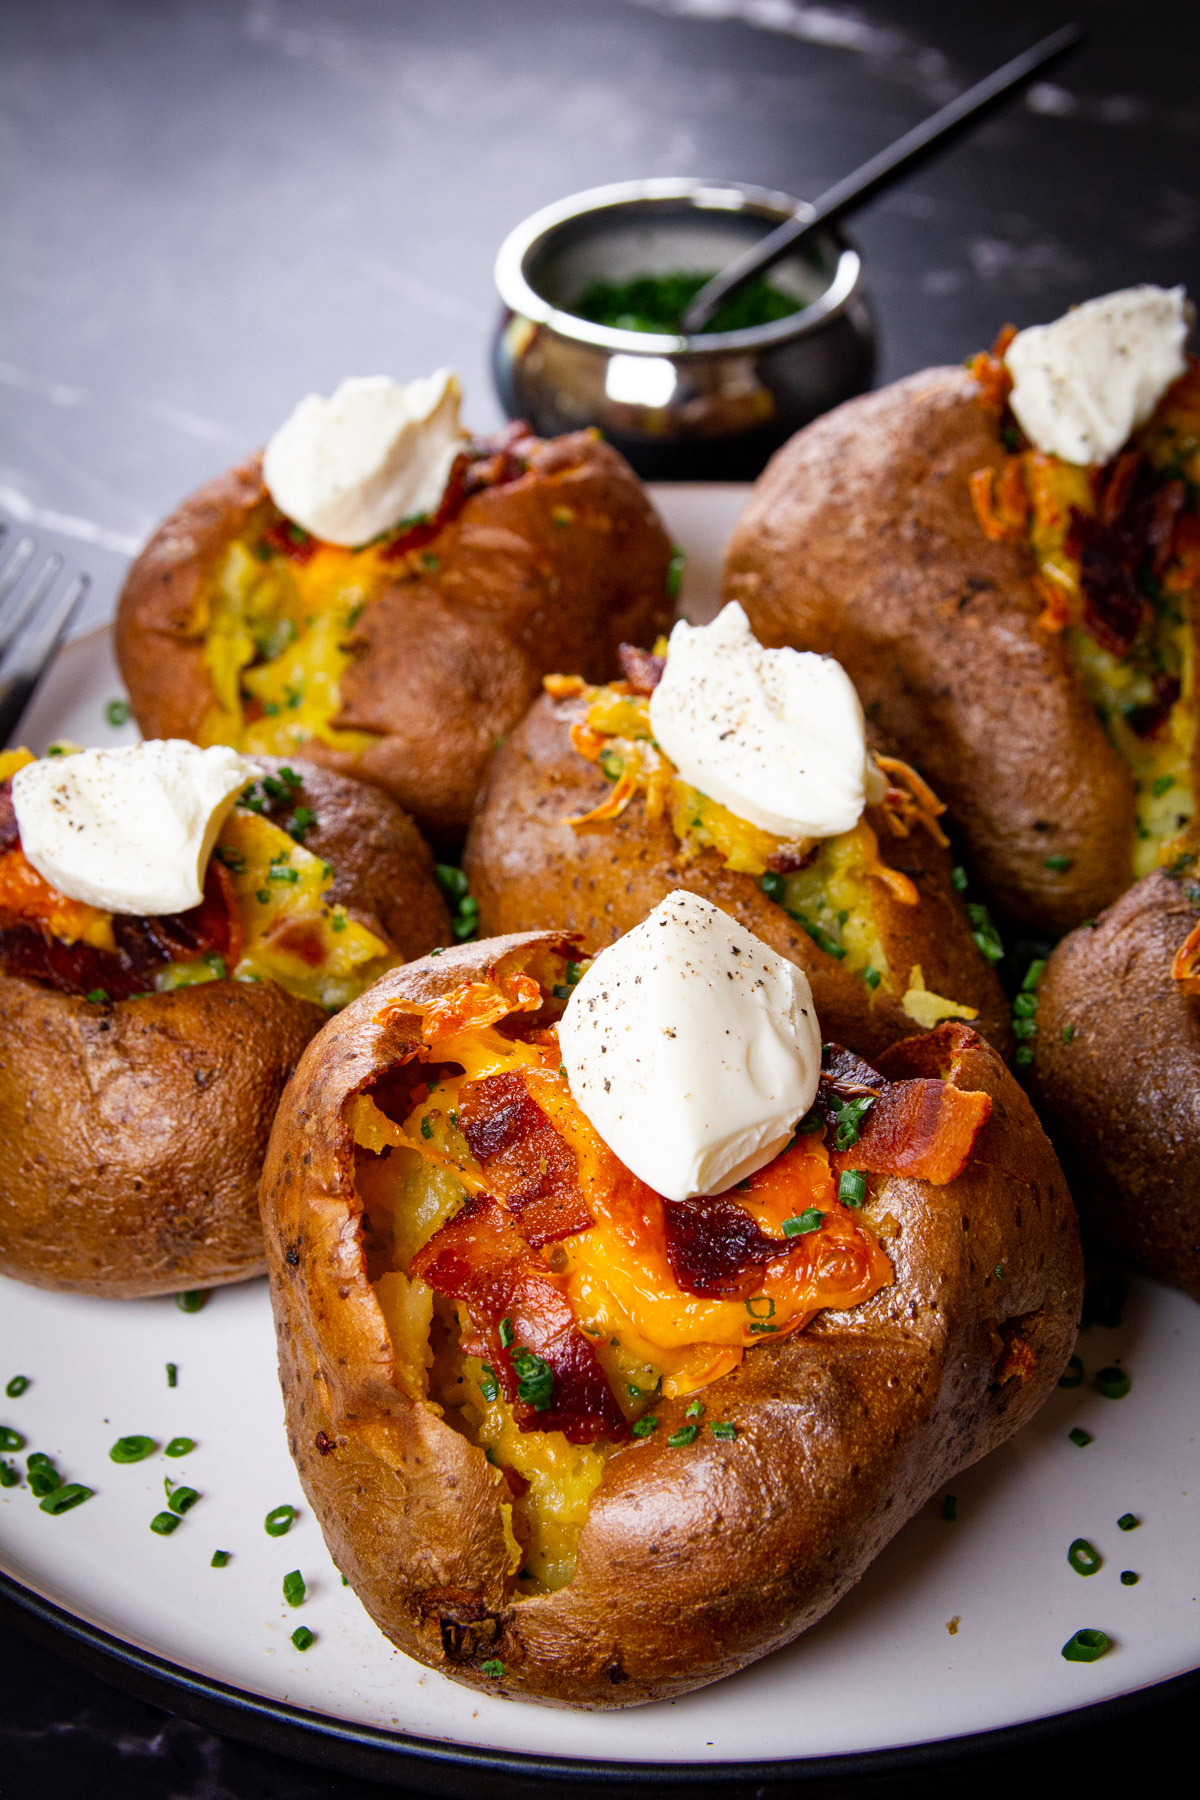 Twice baked spuds on a plate topped with creme fraiche.